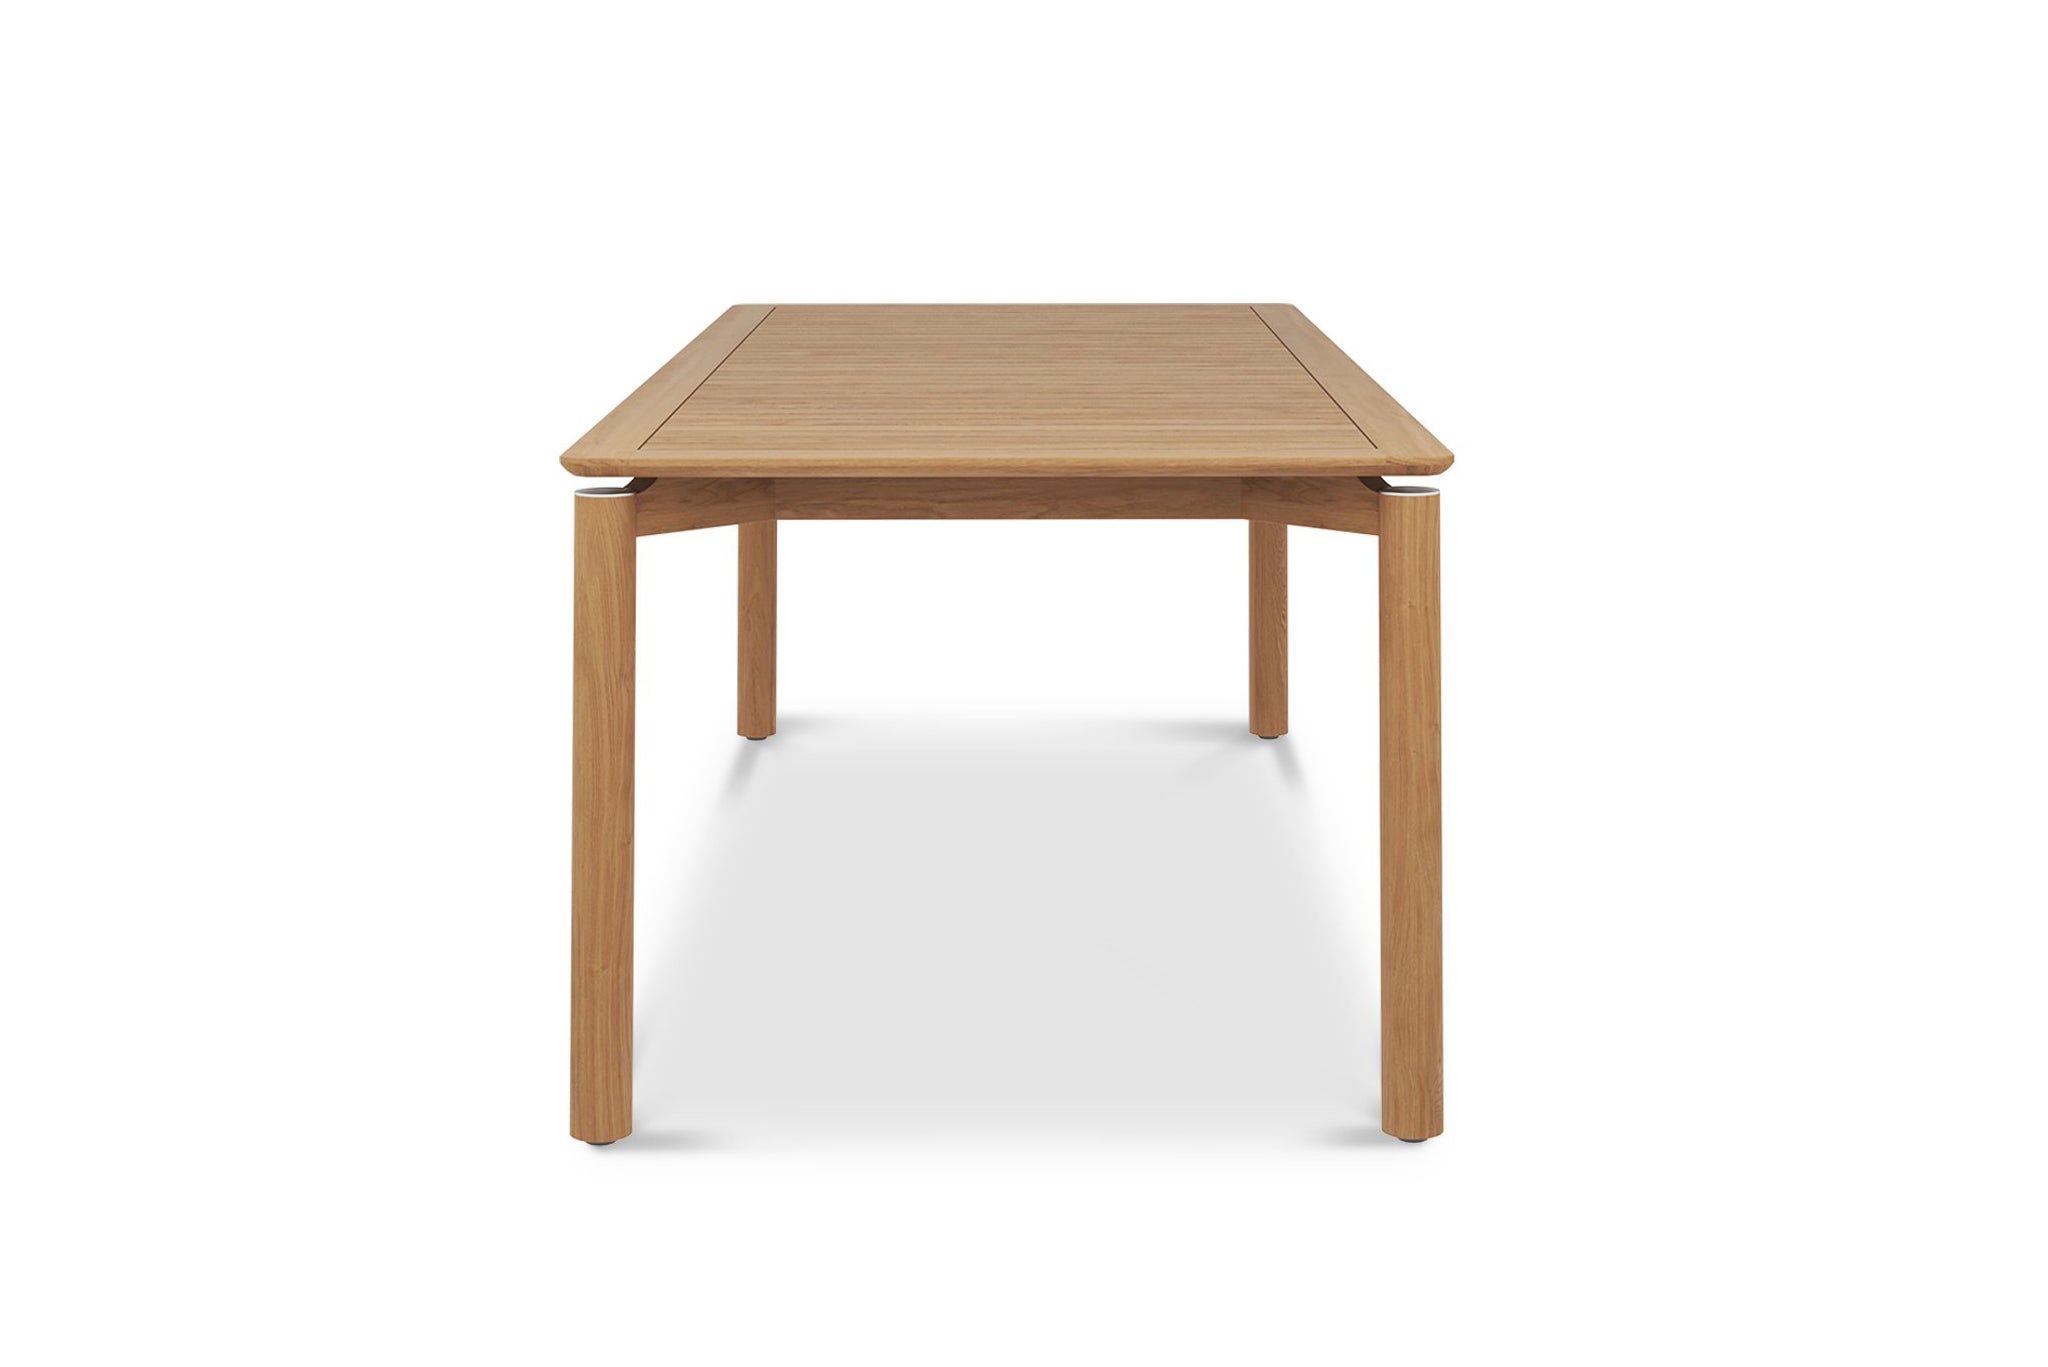 Jervis Bay Teak Outdoor Dining Table – 2.4m